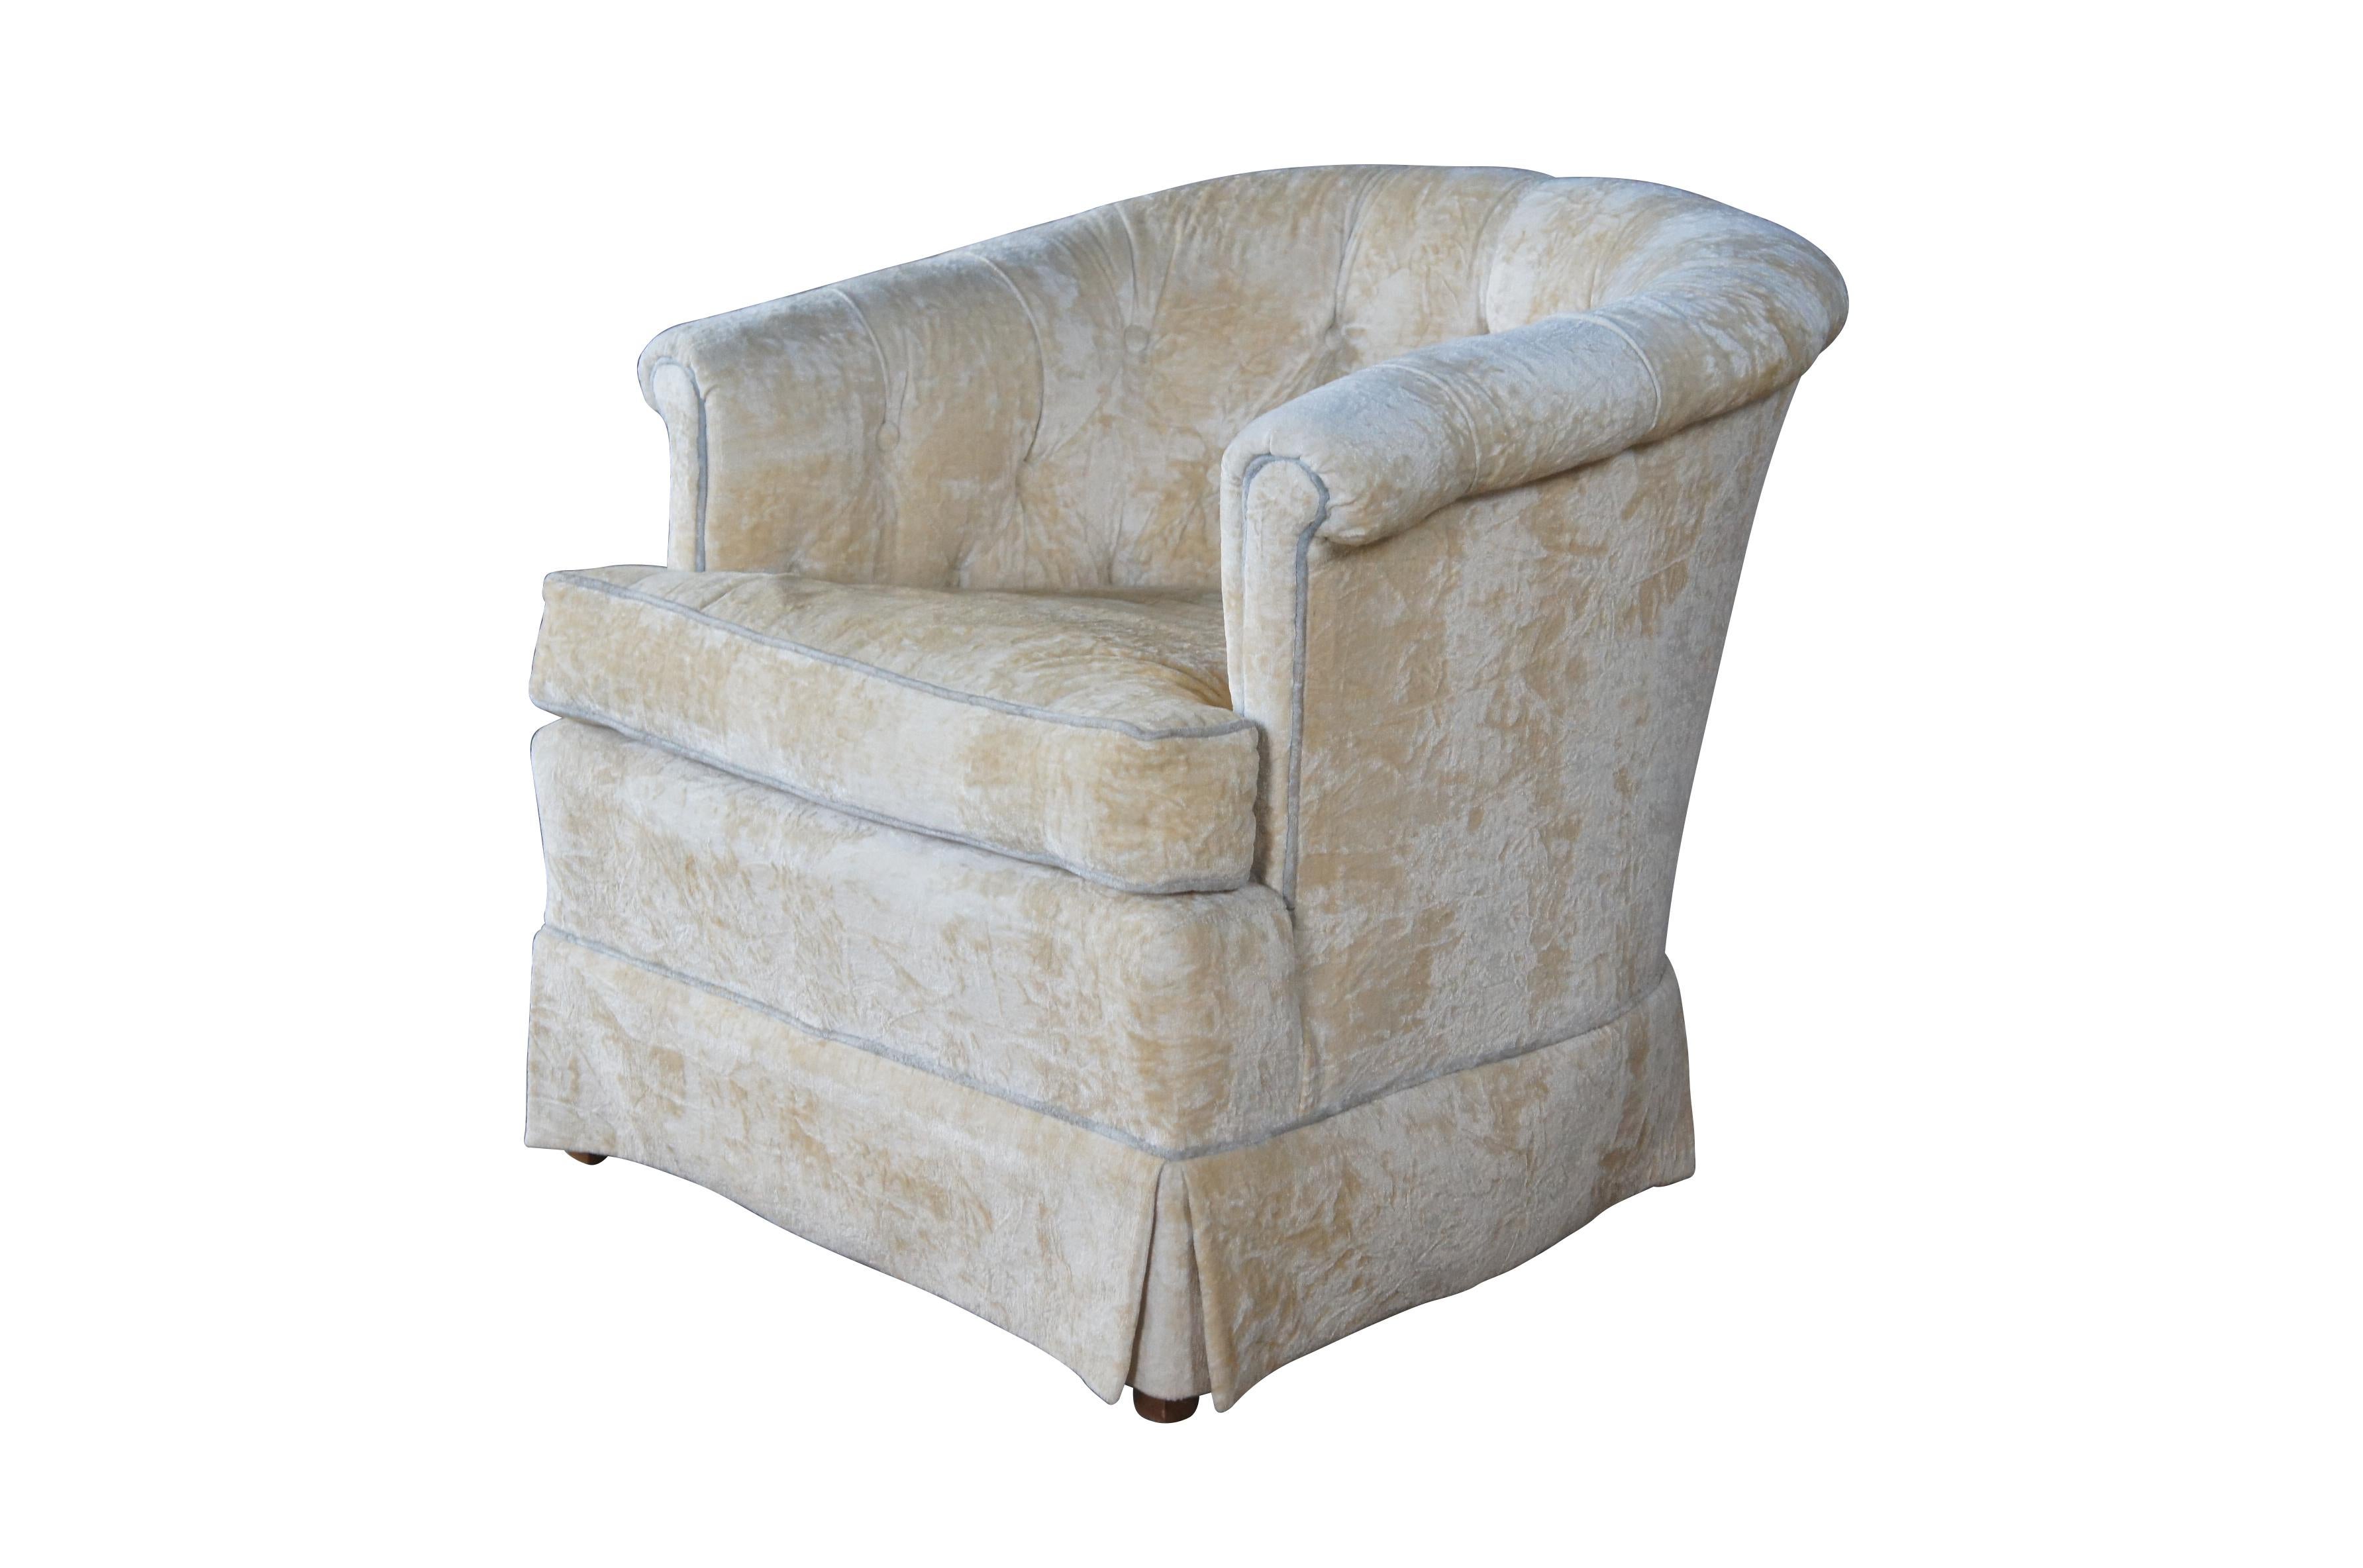 Mid century Hickory Tavern barrel back club chair featuring off cream and baby blue textured velvet with tufted back and skirted base.  Made in Hickory North Carolina.

Dimensions:
31